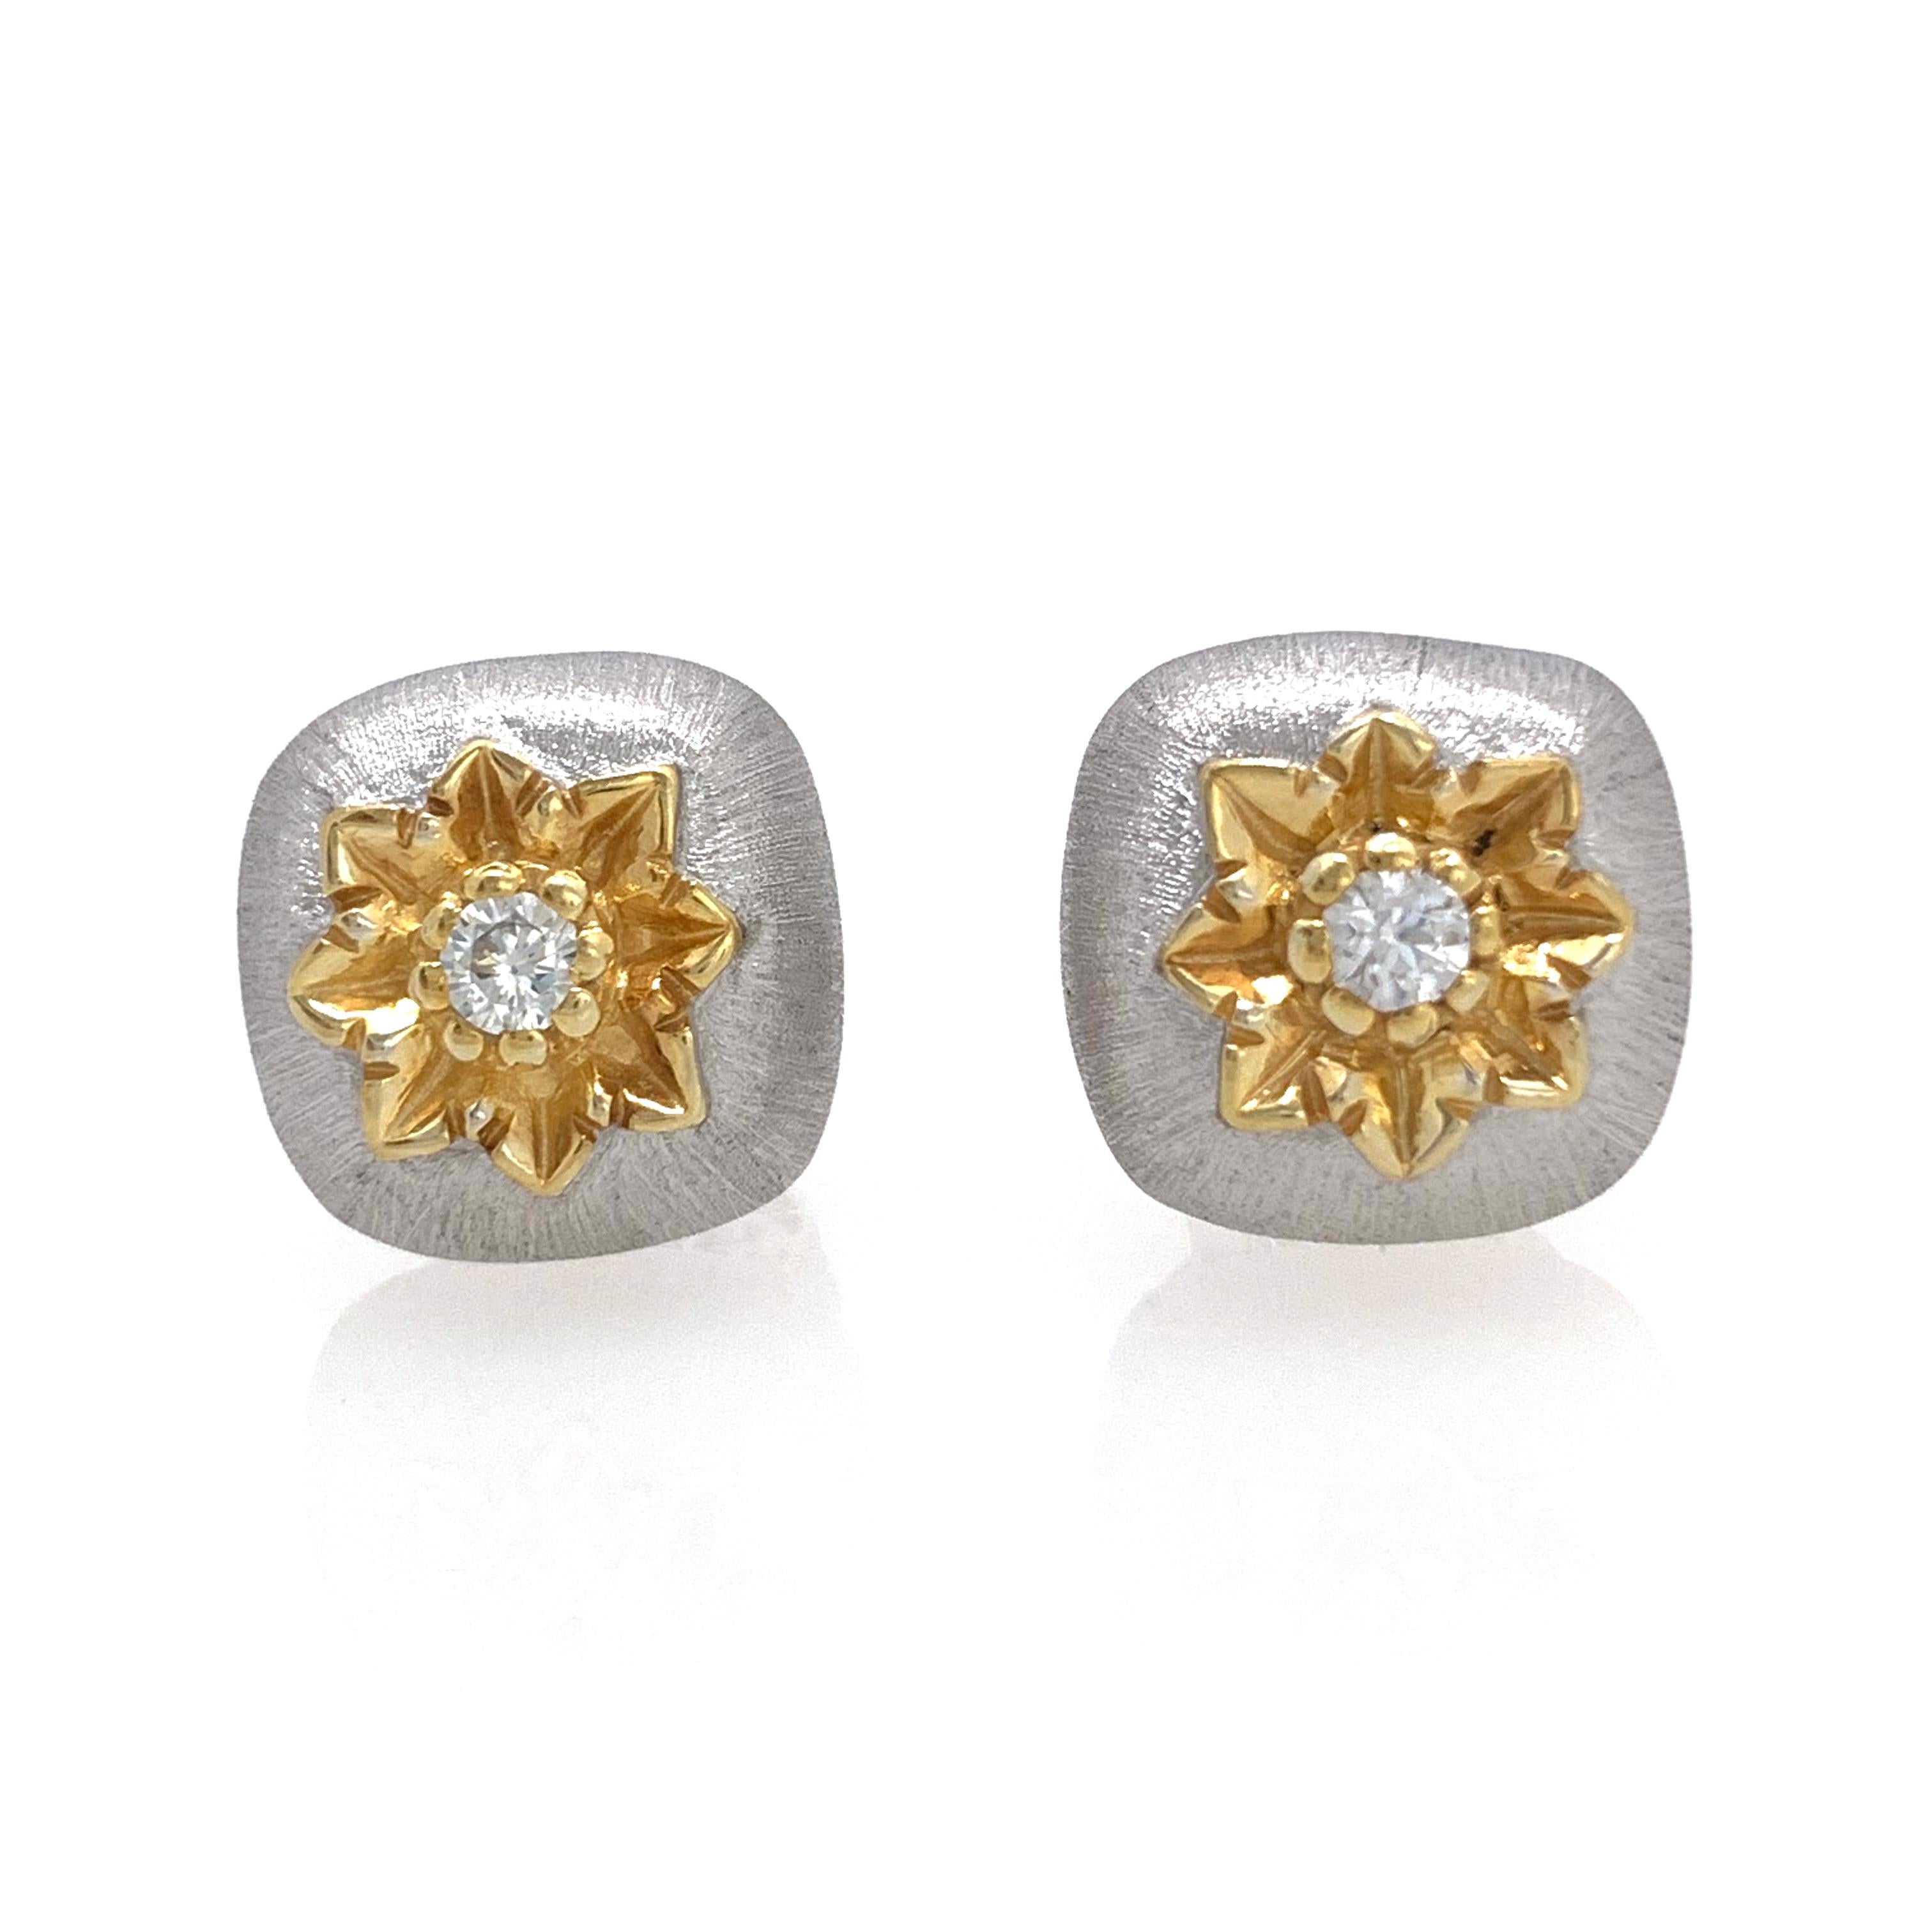 Stunning hand-engraved flower cushion stud earrings handset with faux diamond cubic zirconia.  The earrings feature hand-engraved flower, along with handcrafted Italian Rigato etching technique. Platinum rhodium and 18k gold two tone plated sterling